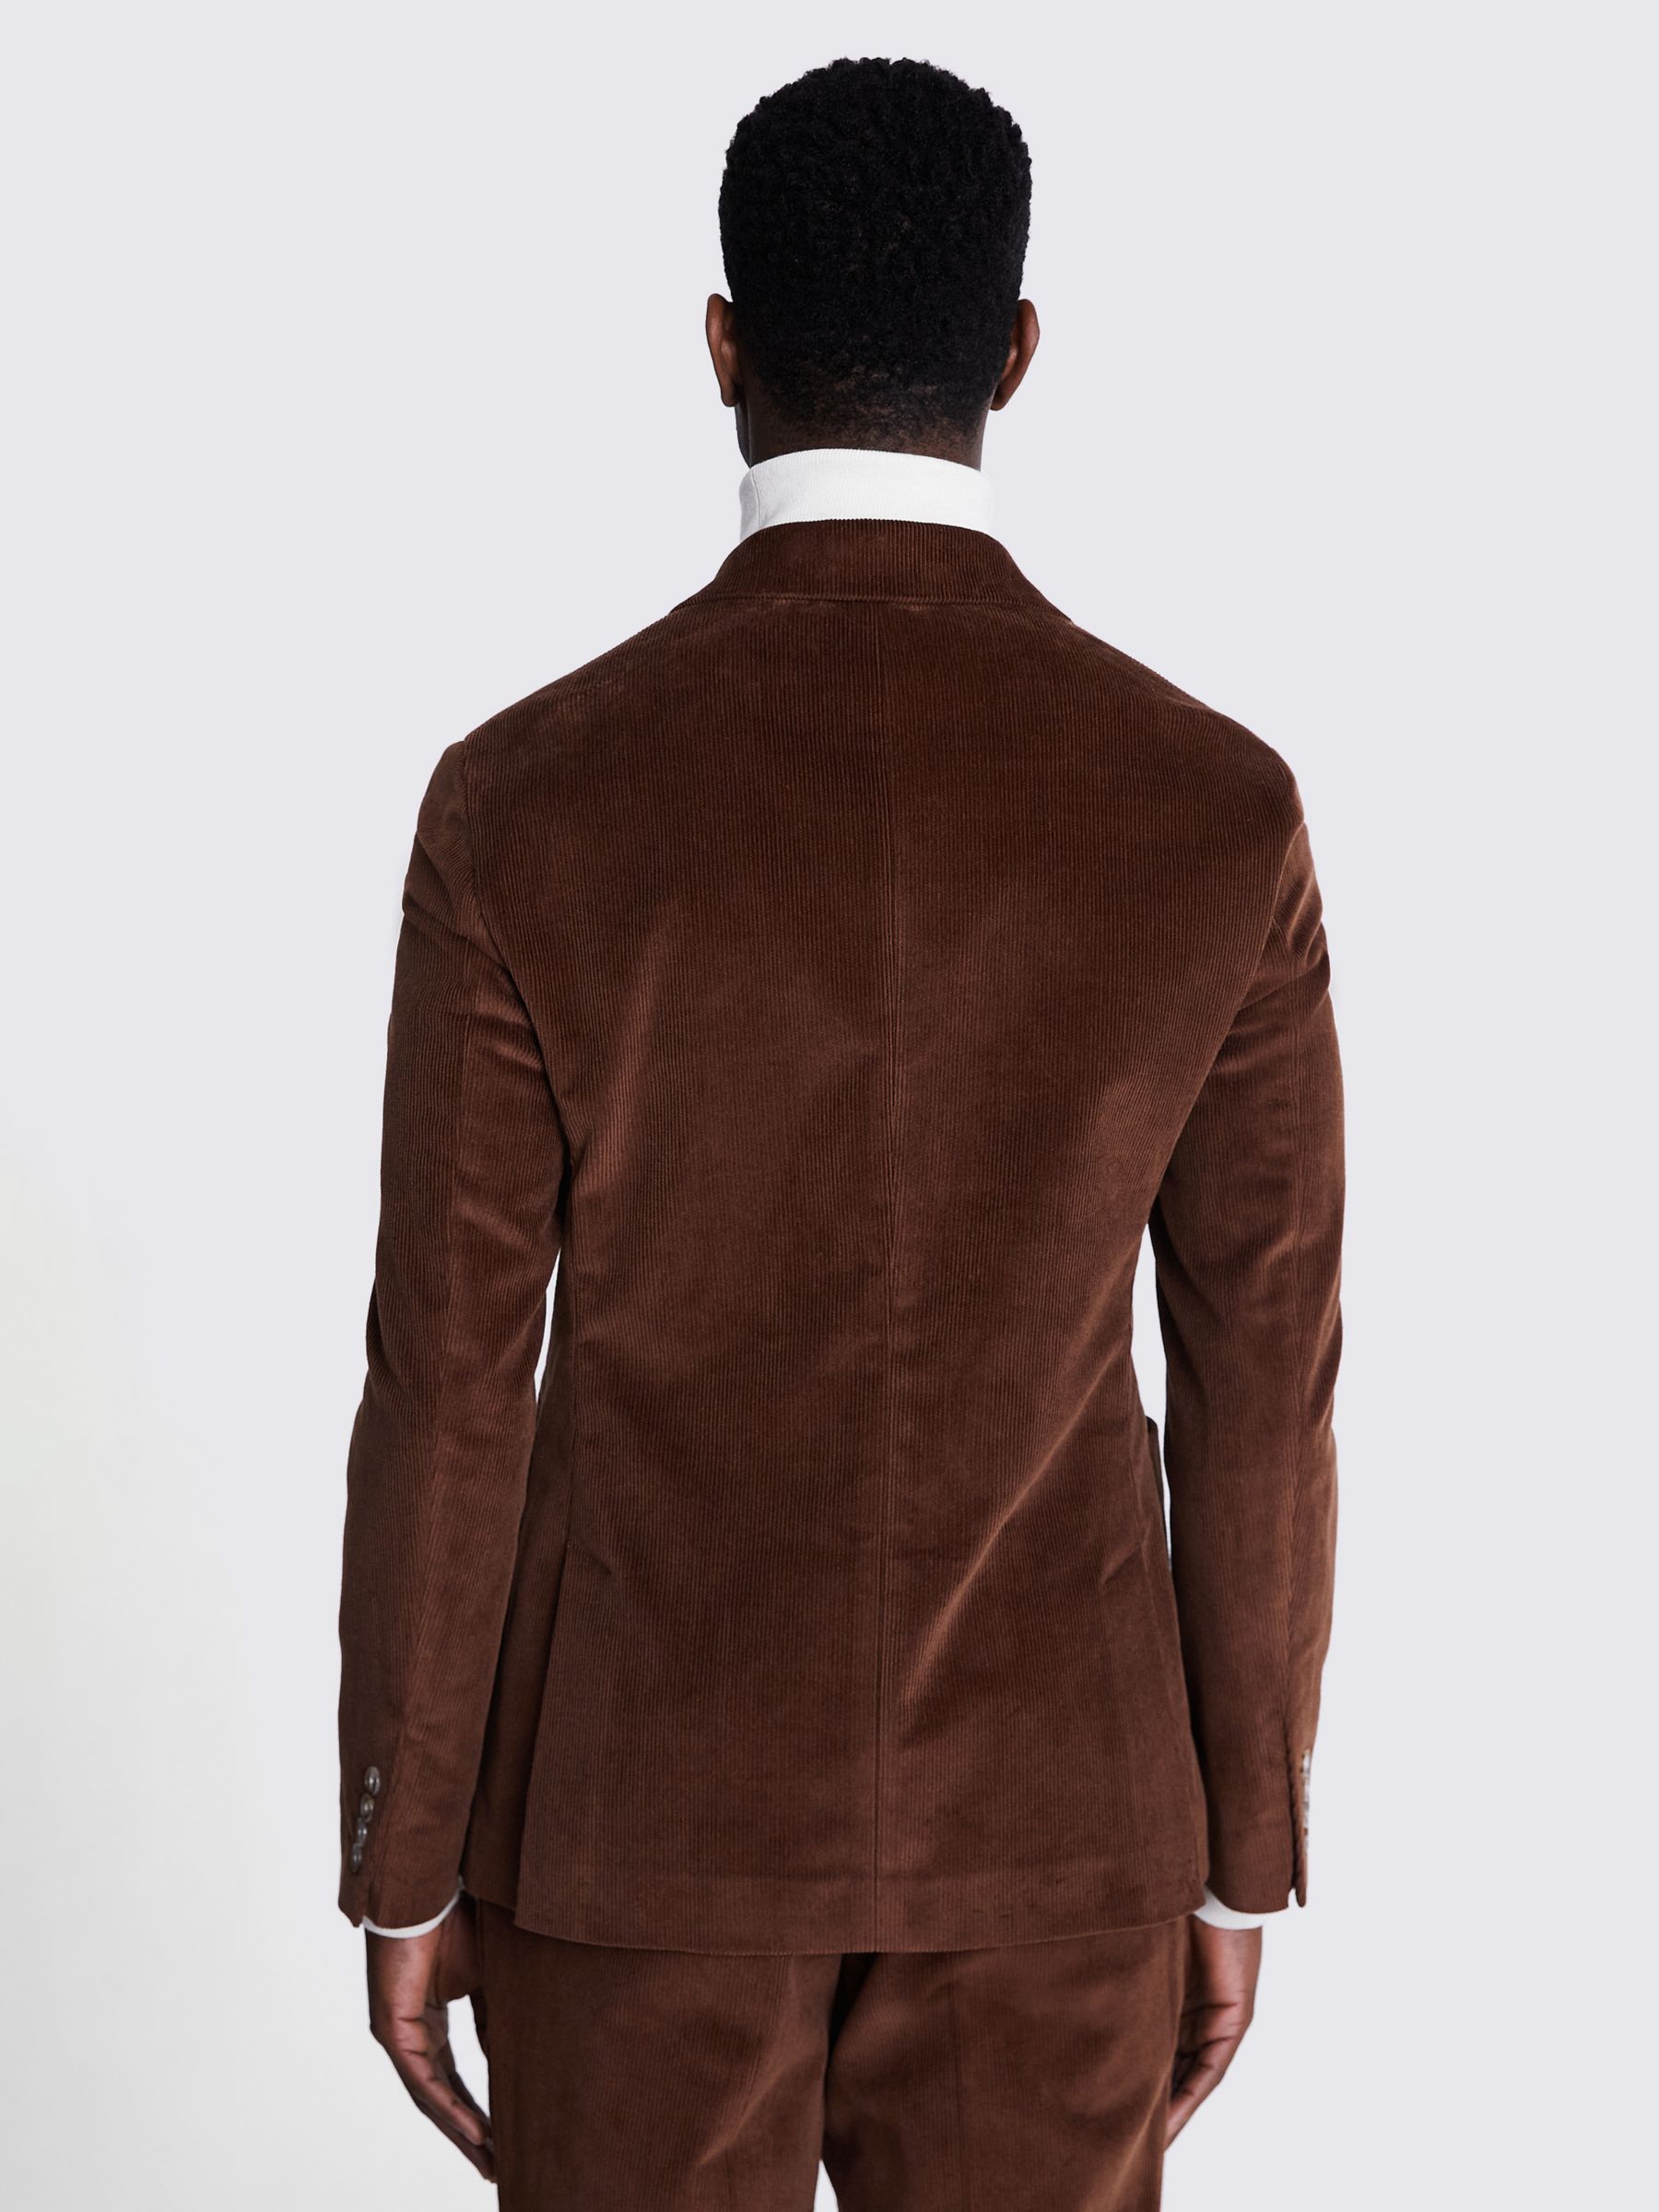 Buy Moss Slim Fit Double Breasted Corduroy Suit Jacket, Copper Online at johnlewis.com